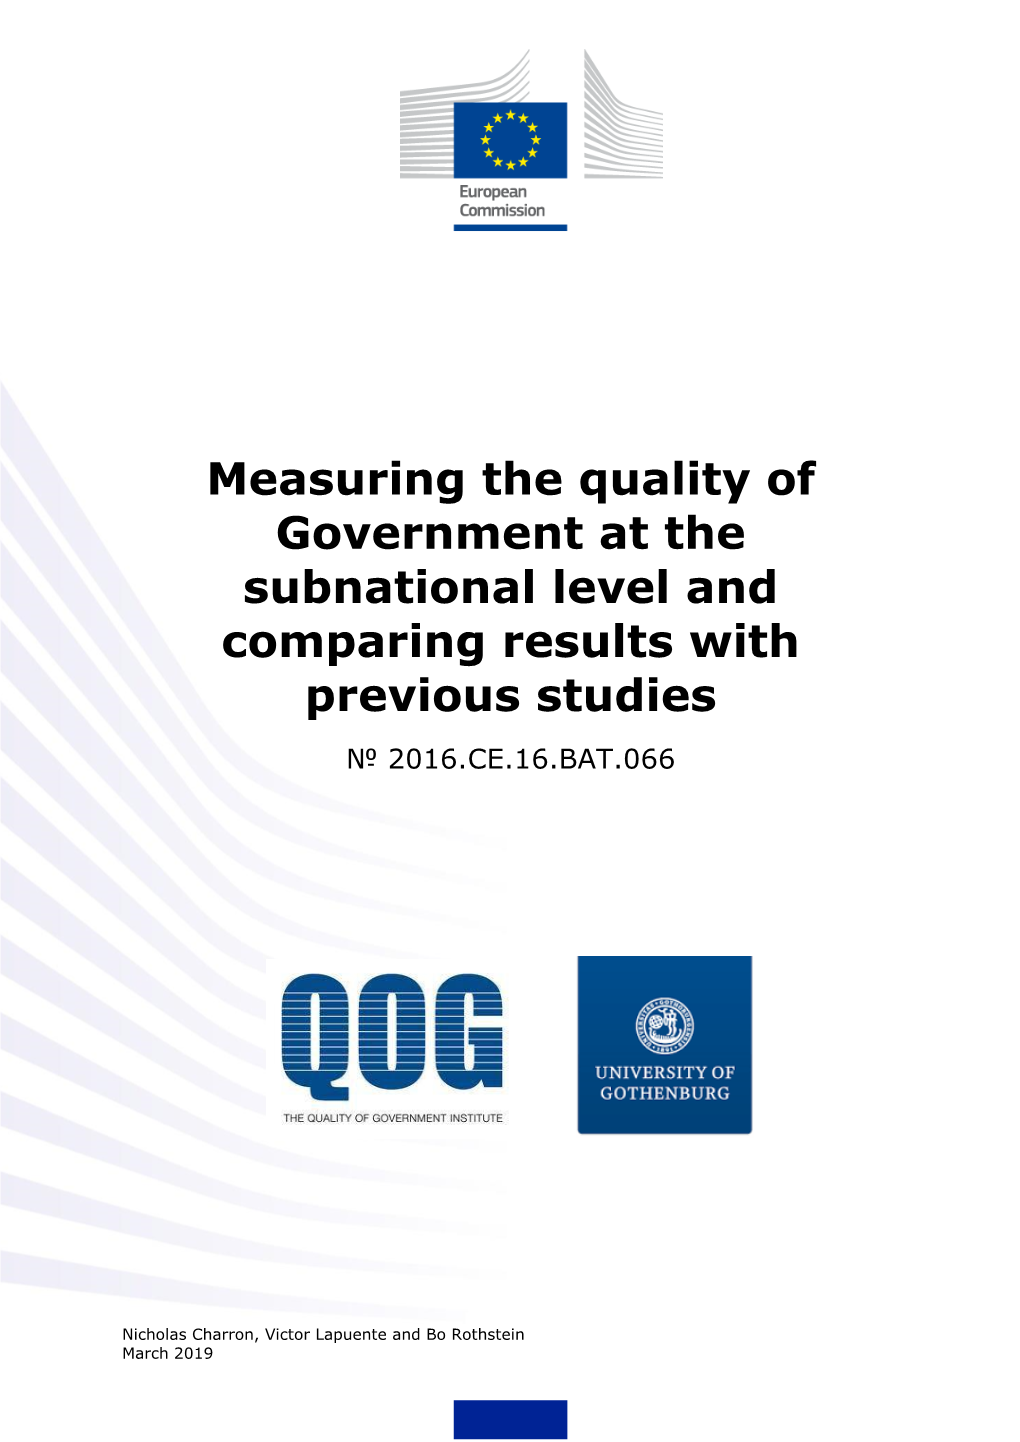 Measuring the Quality of Government at the Subnational Level and Comparing Results with Previous Studies № 2016.СЕ.16.ВАТ.066